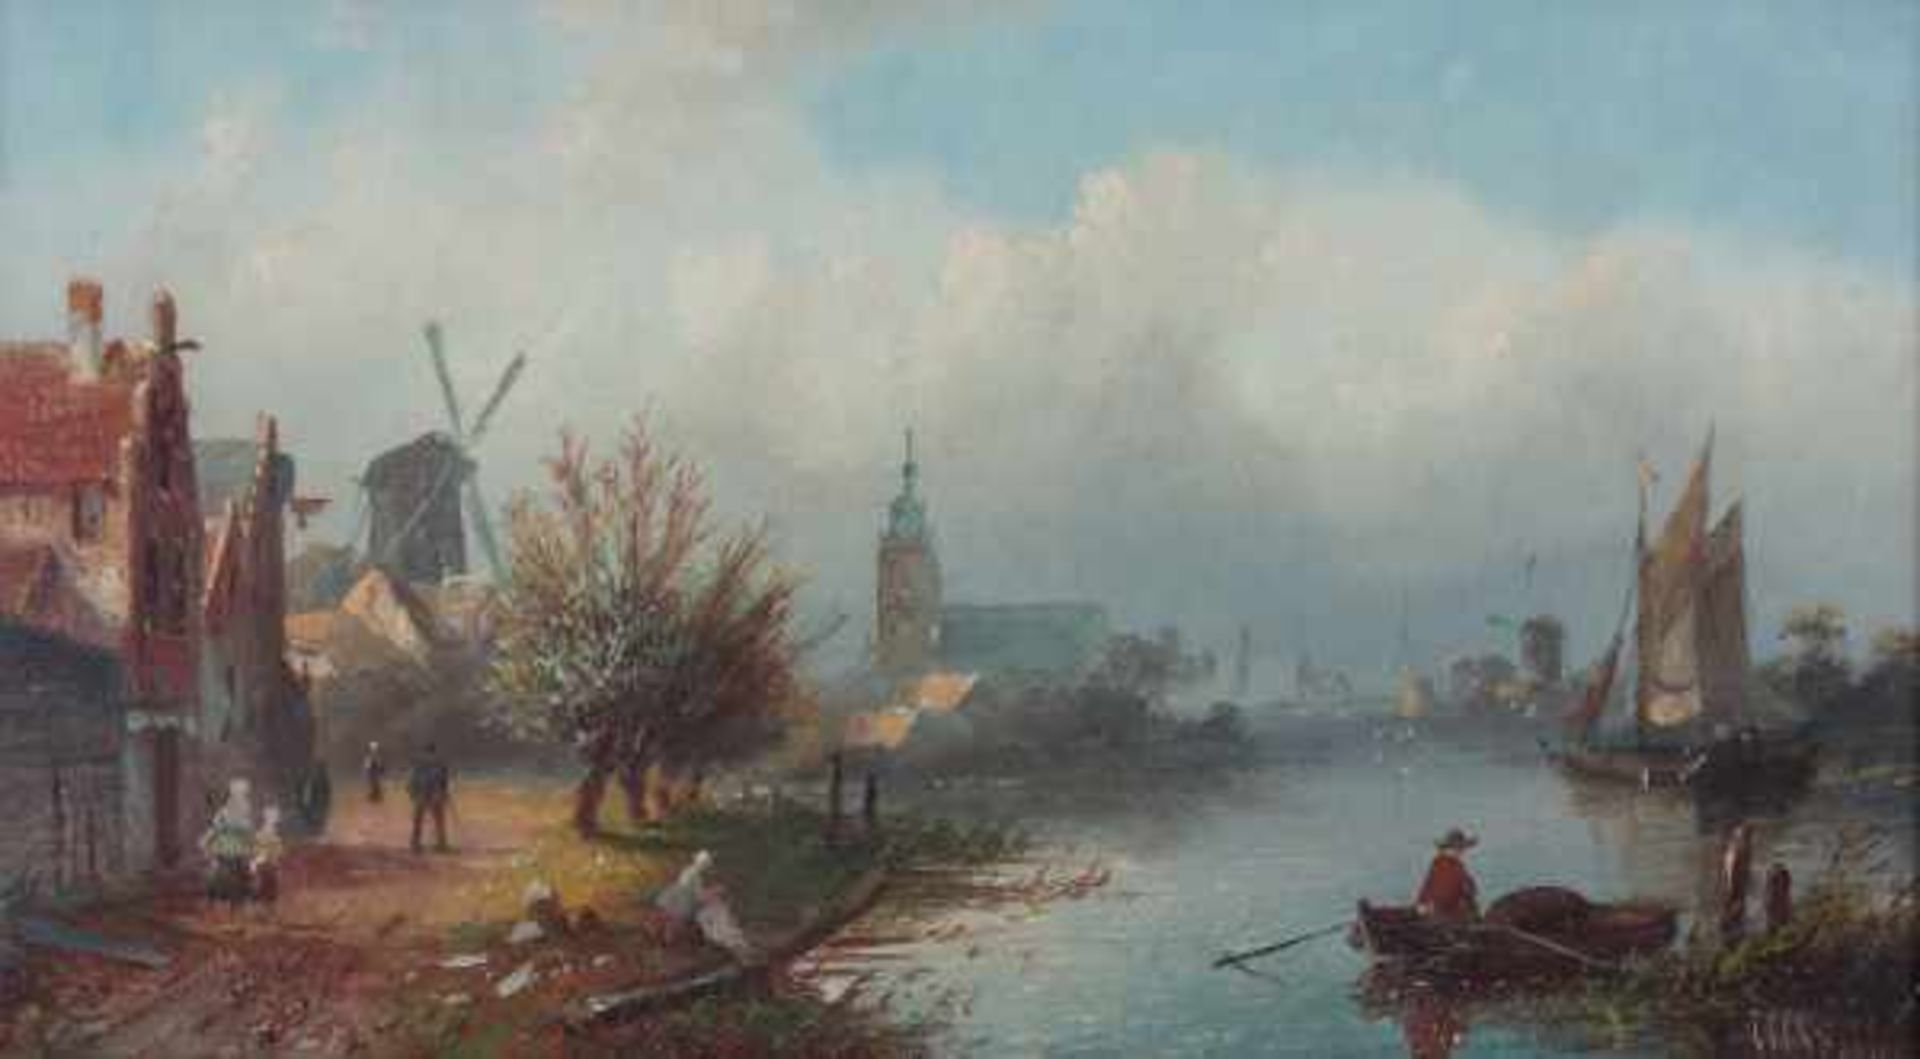 Attributed to Jan Jacob Coenraad Spohler (1837-1922)Near Overschie. Signed lower right.canvas 18 x